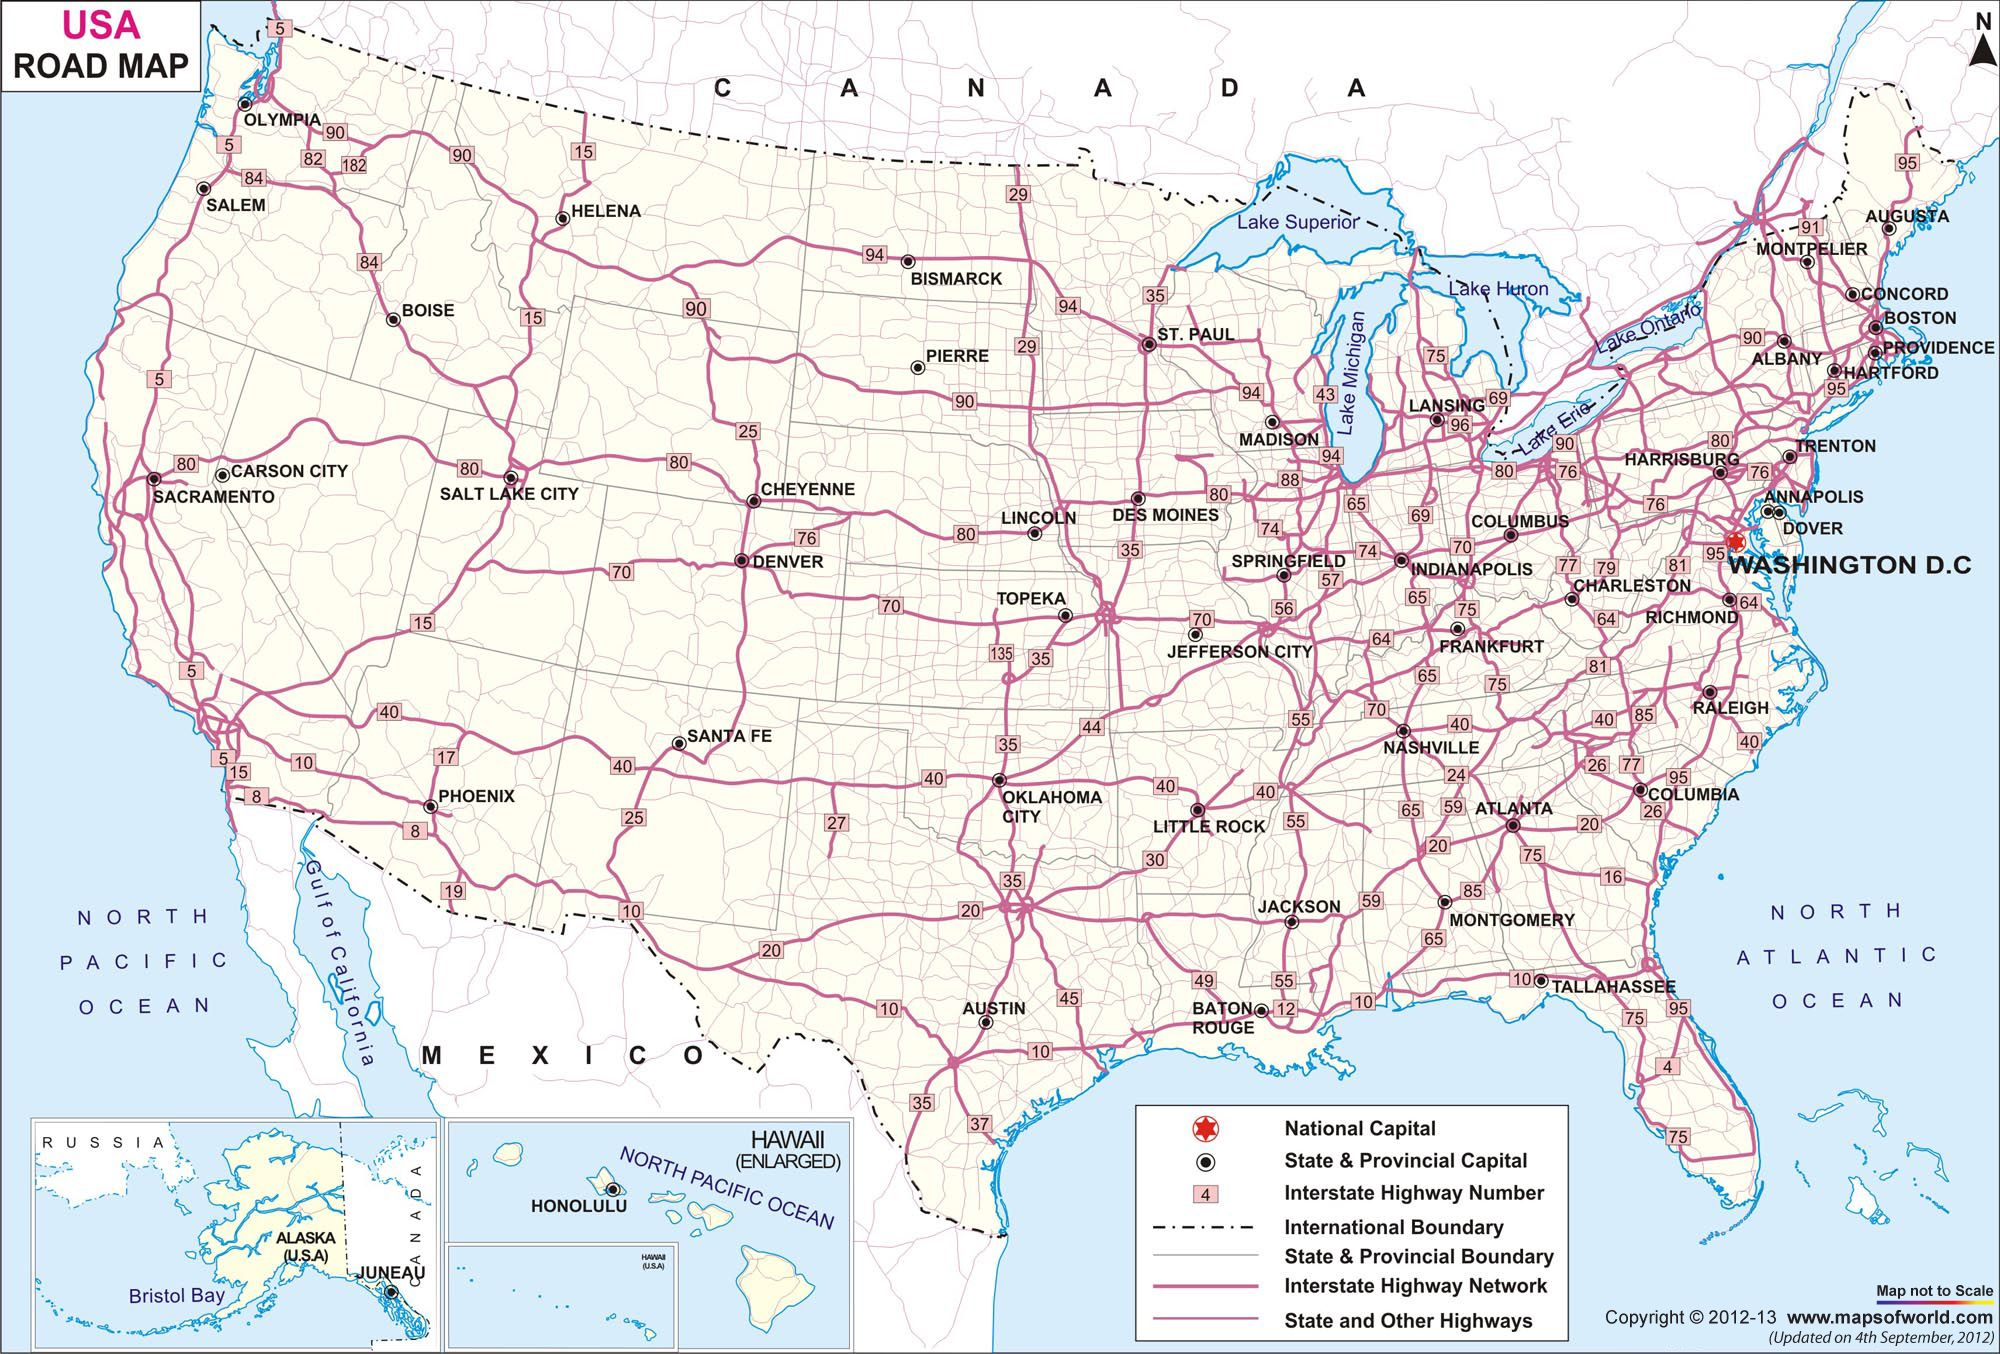 USA Road Network Map Tourist Map Usa Road Map Travel Maps